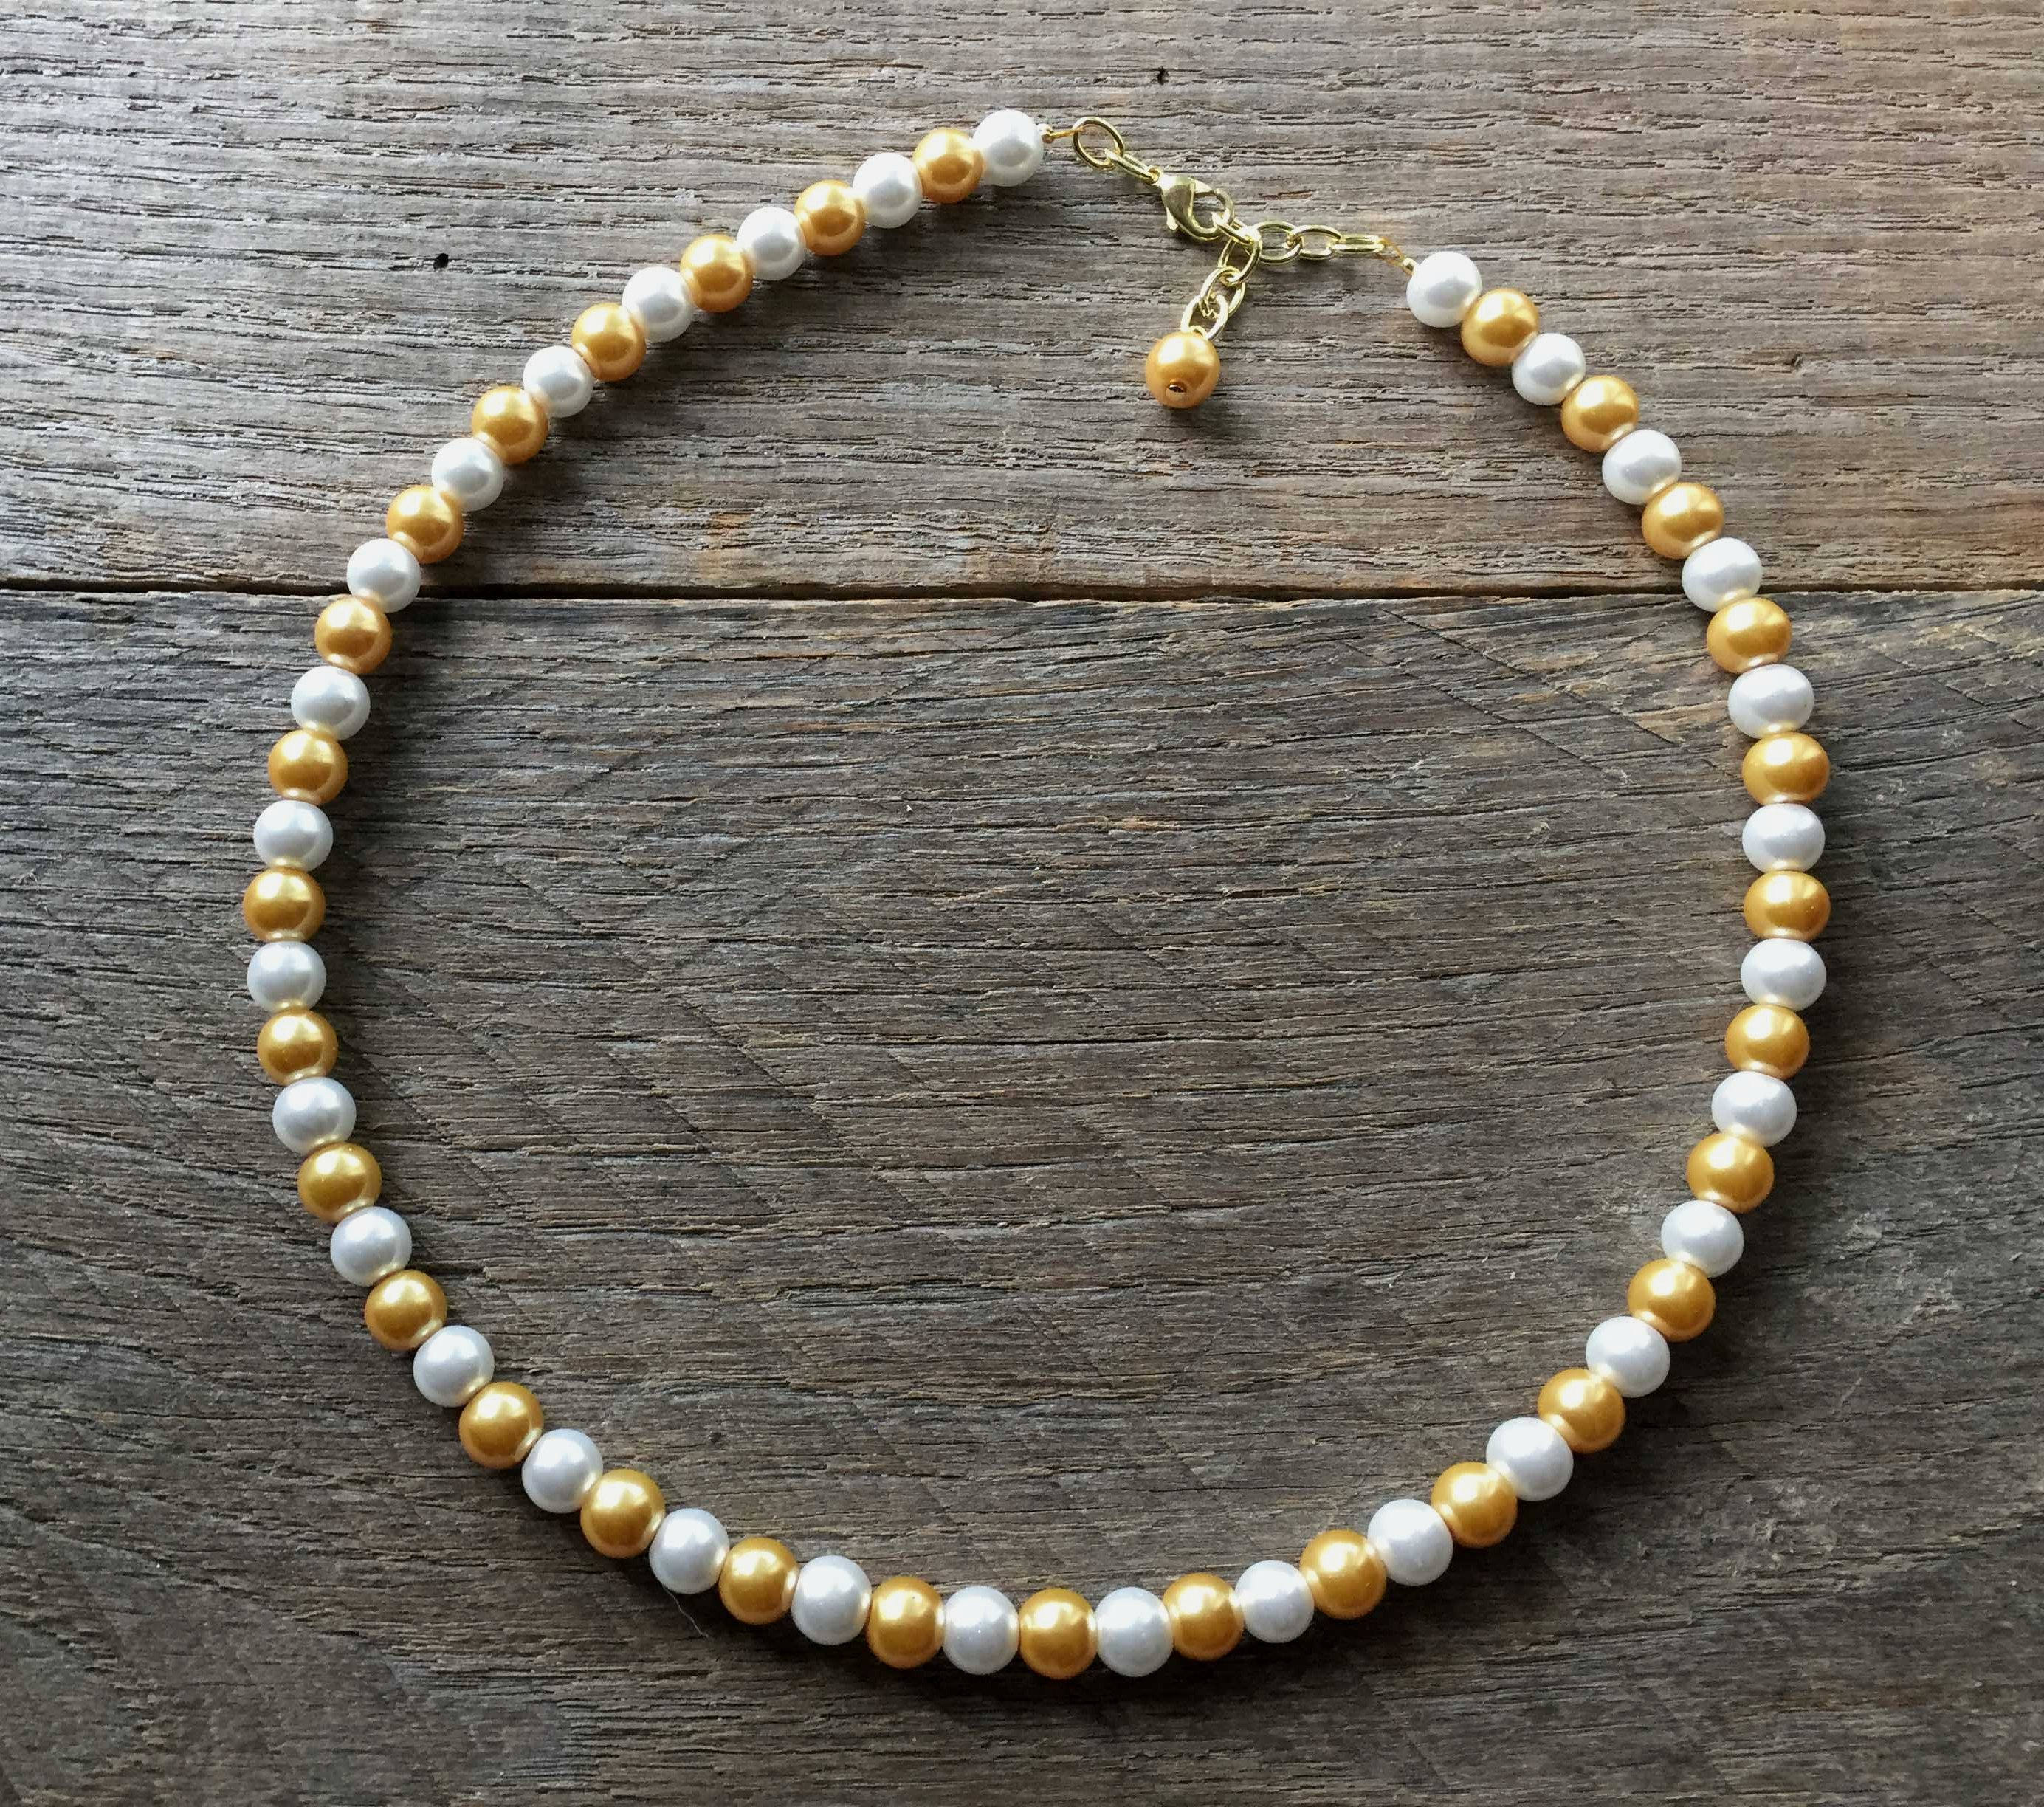 Gold and White Pearl Necklace Bridal Necklace Wedding | Etsy